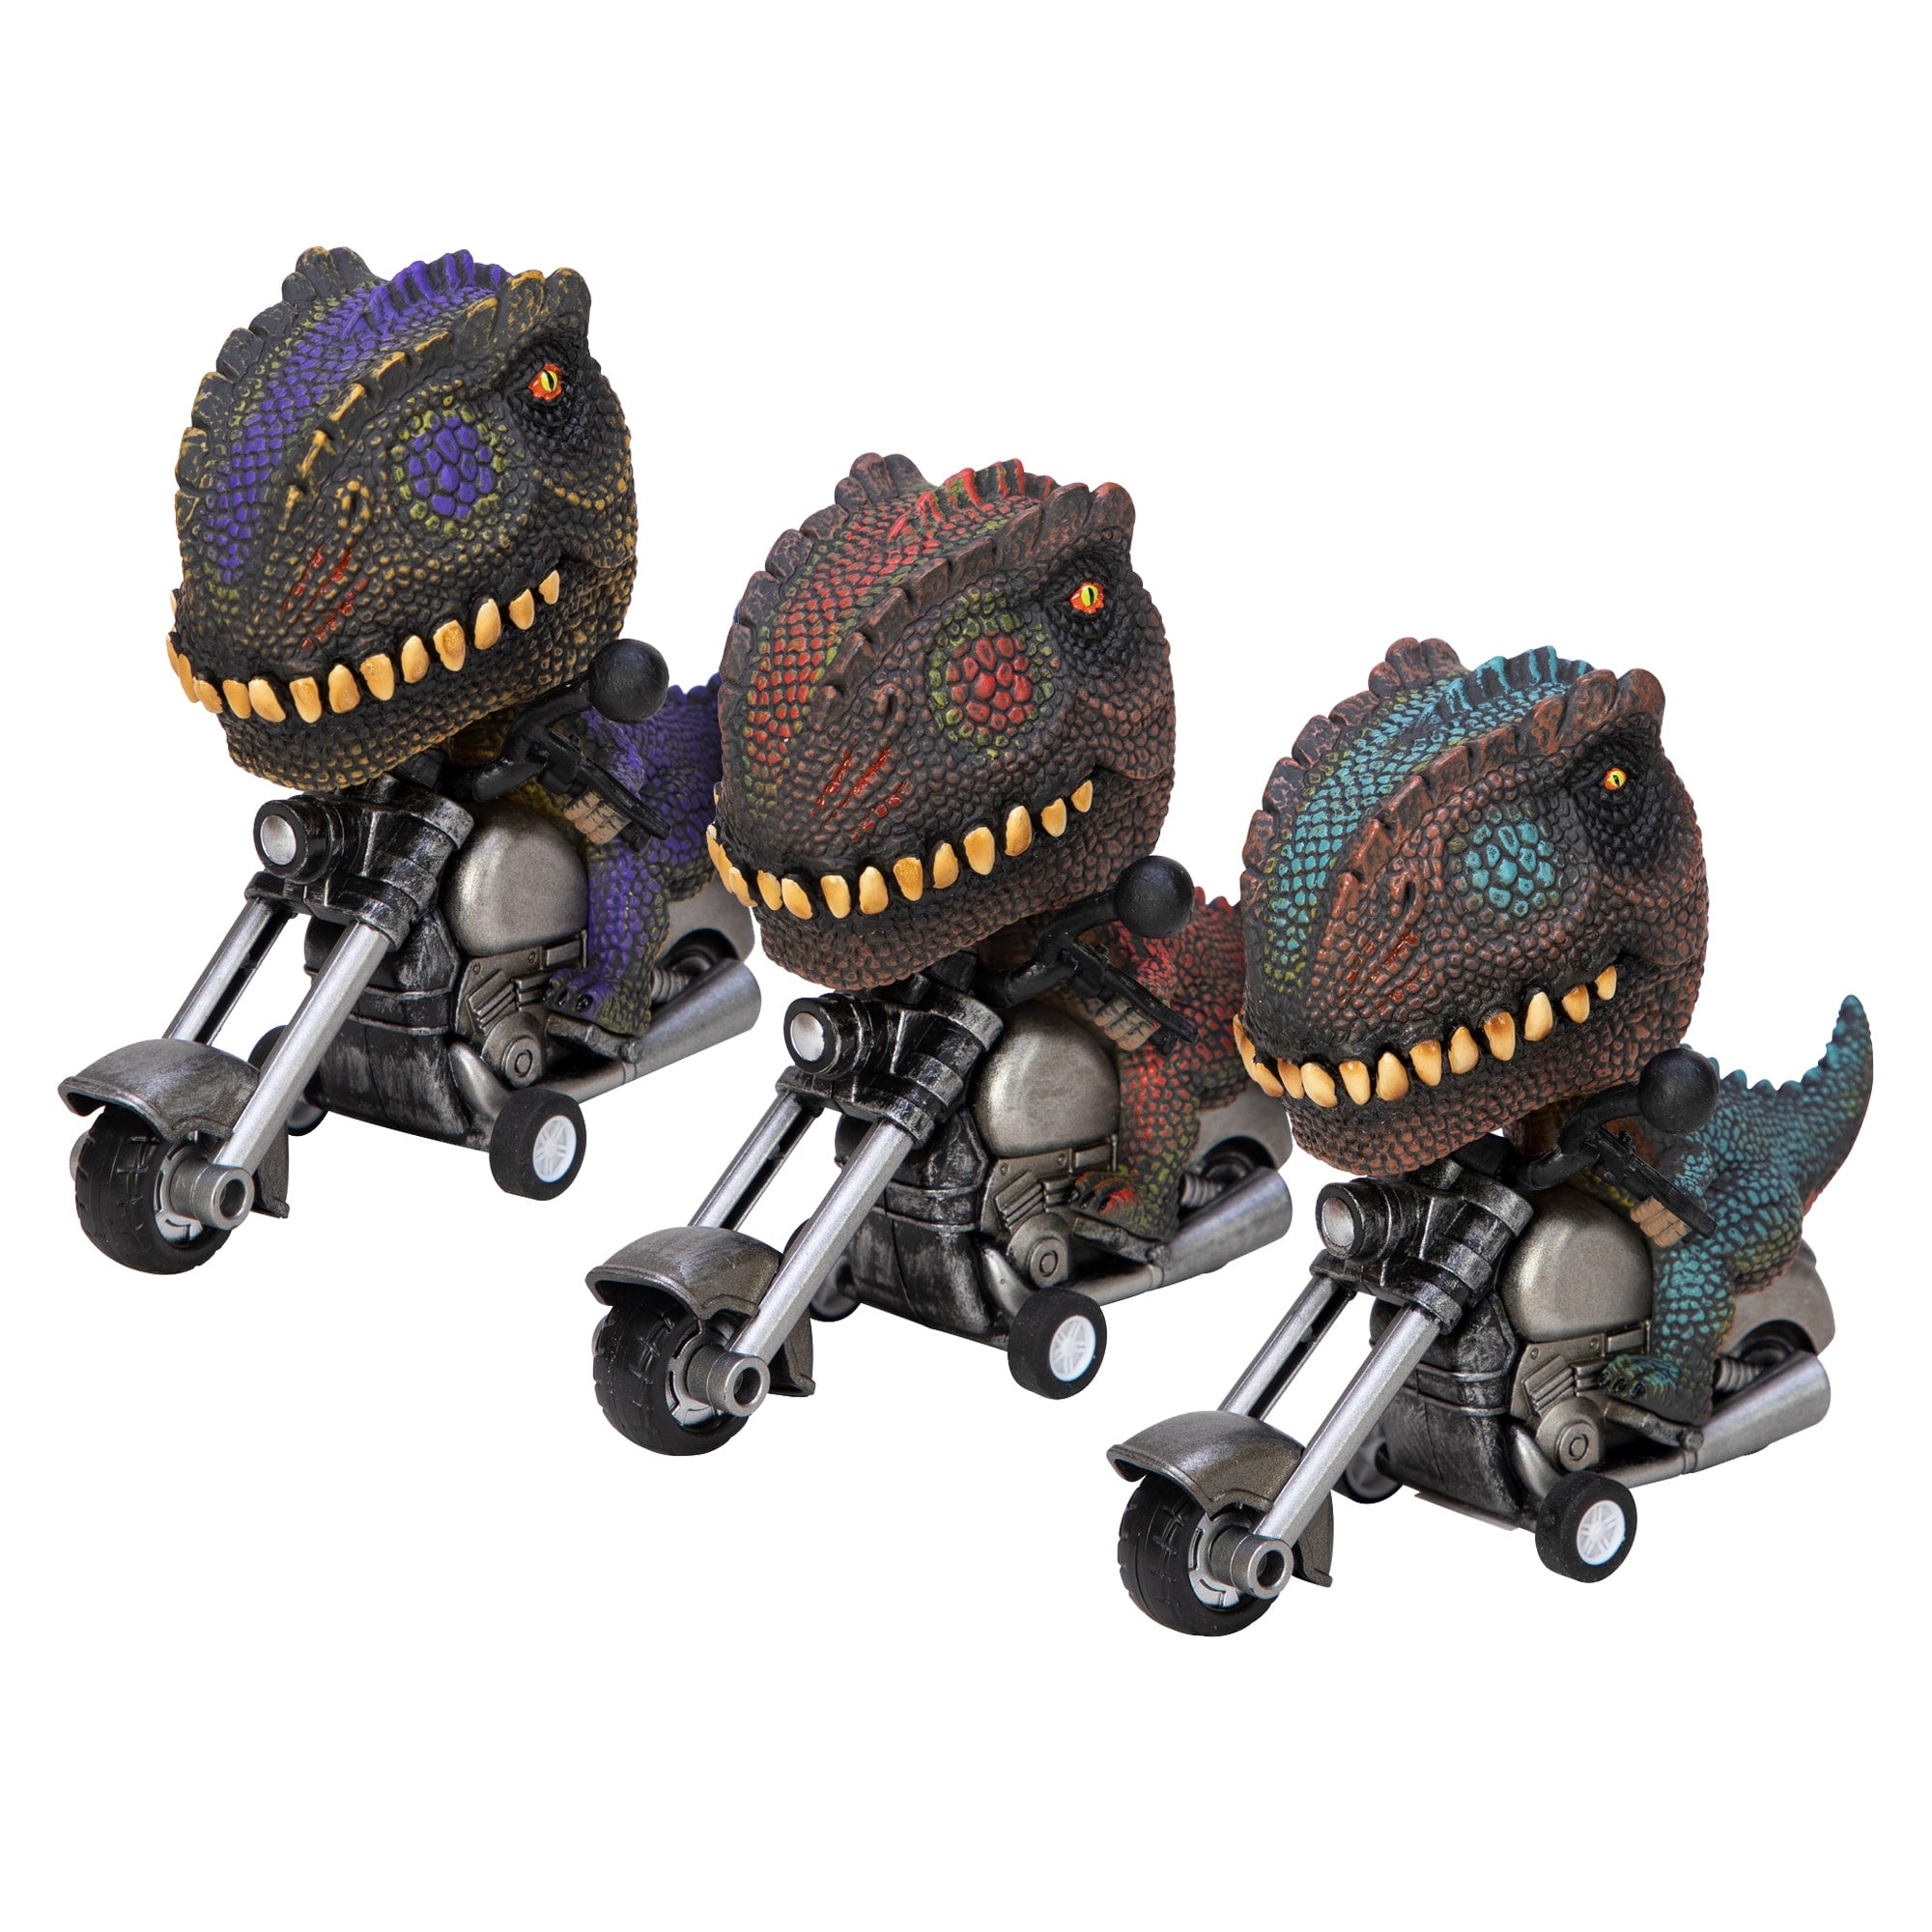 T-Rex Riders - Ages 3+